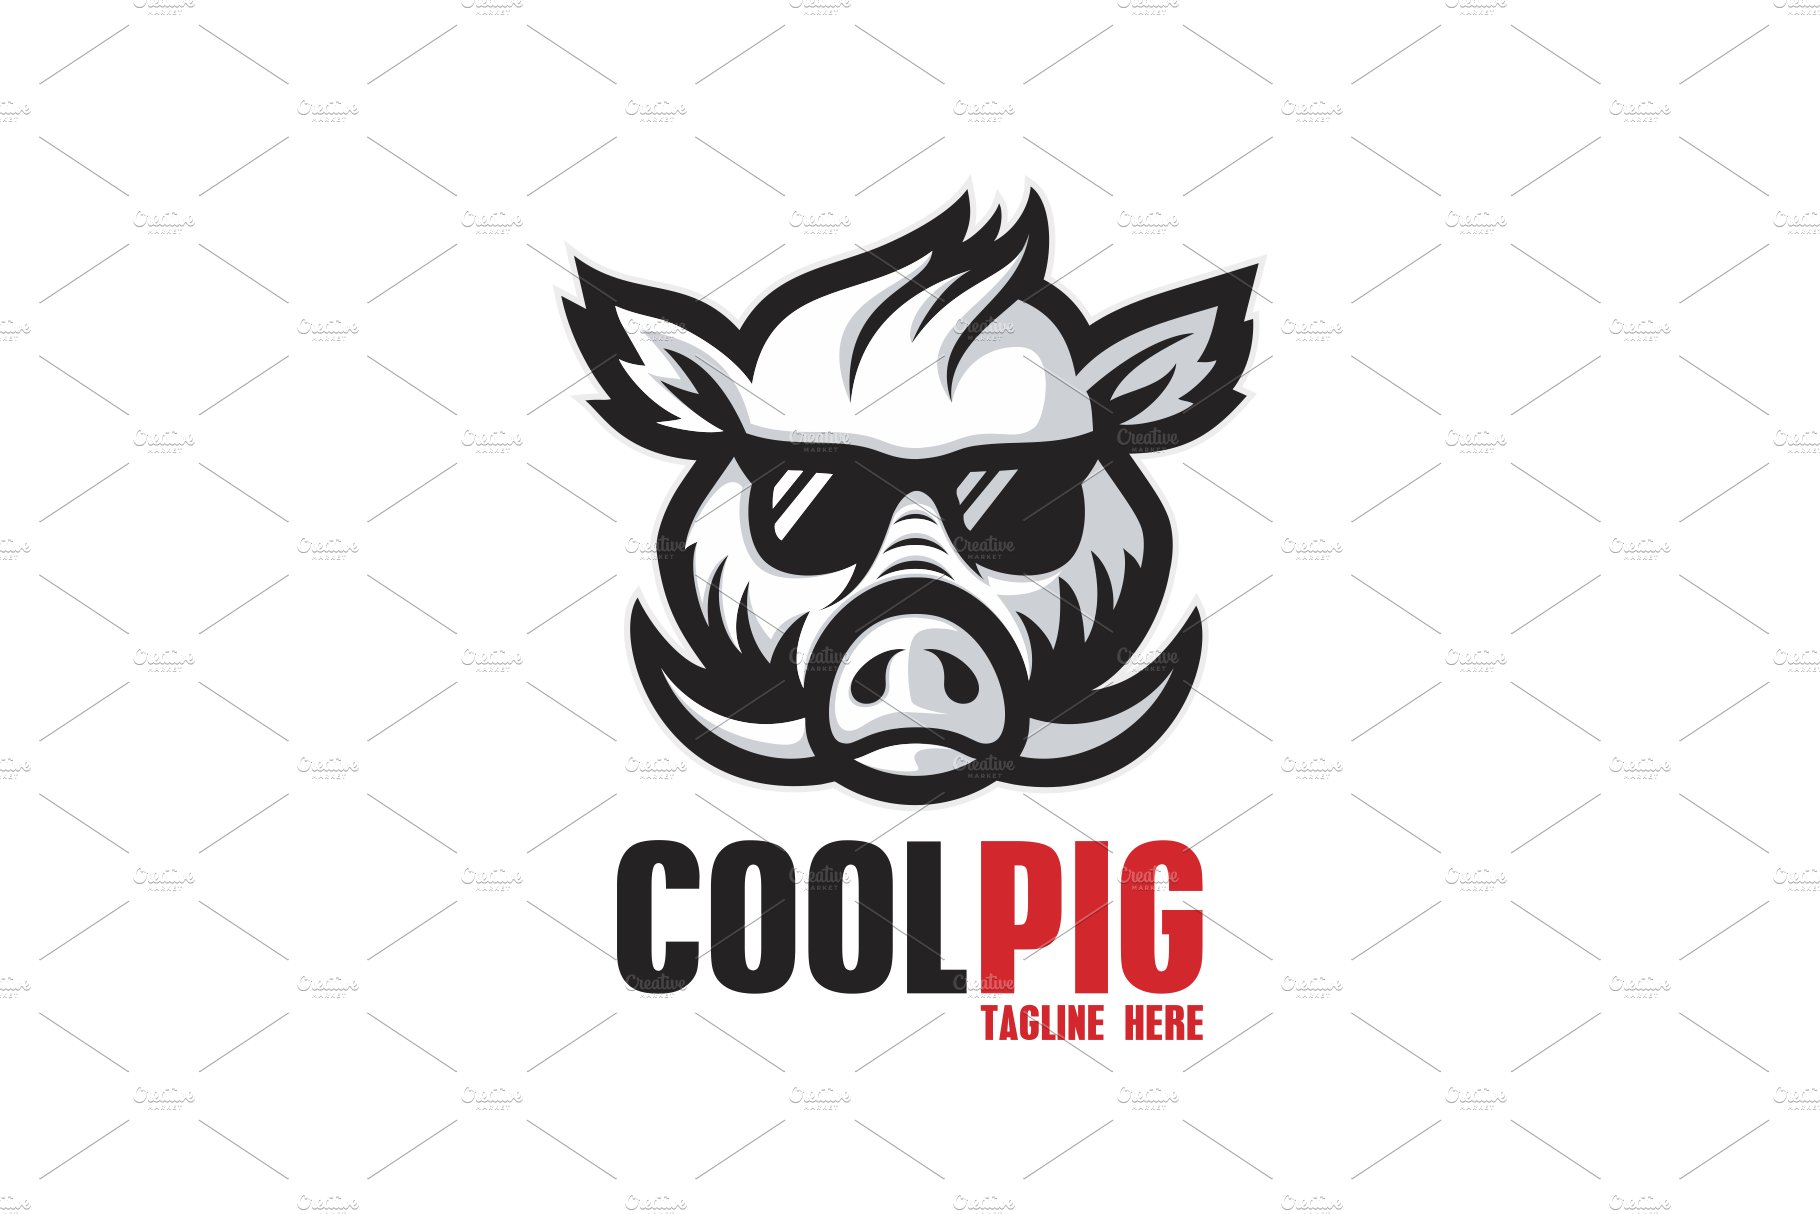 Cool Pig Logo cover image.